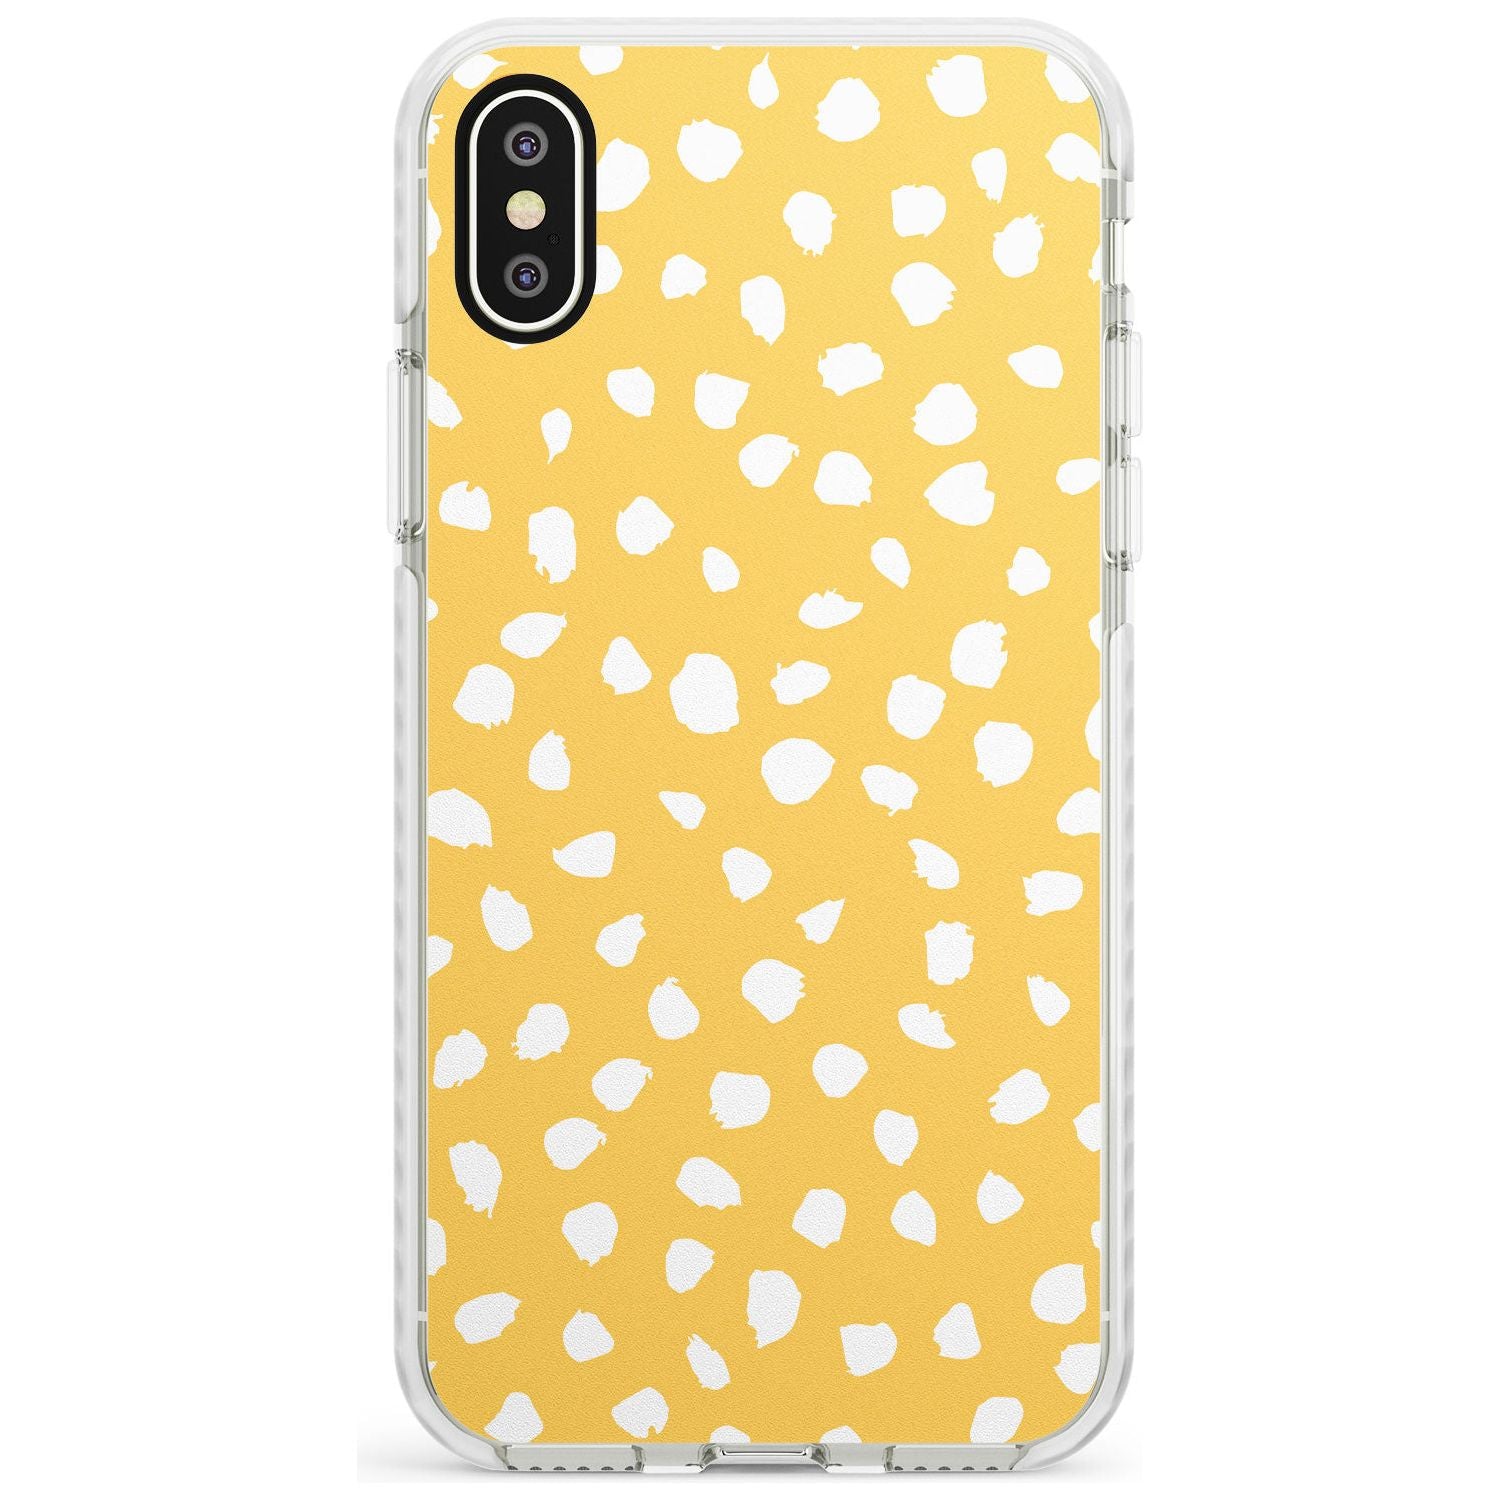 White on Yellow Dalmatian Polka Dot Spots Impact Phone Case for iPhone X XS Max XR